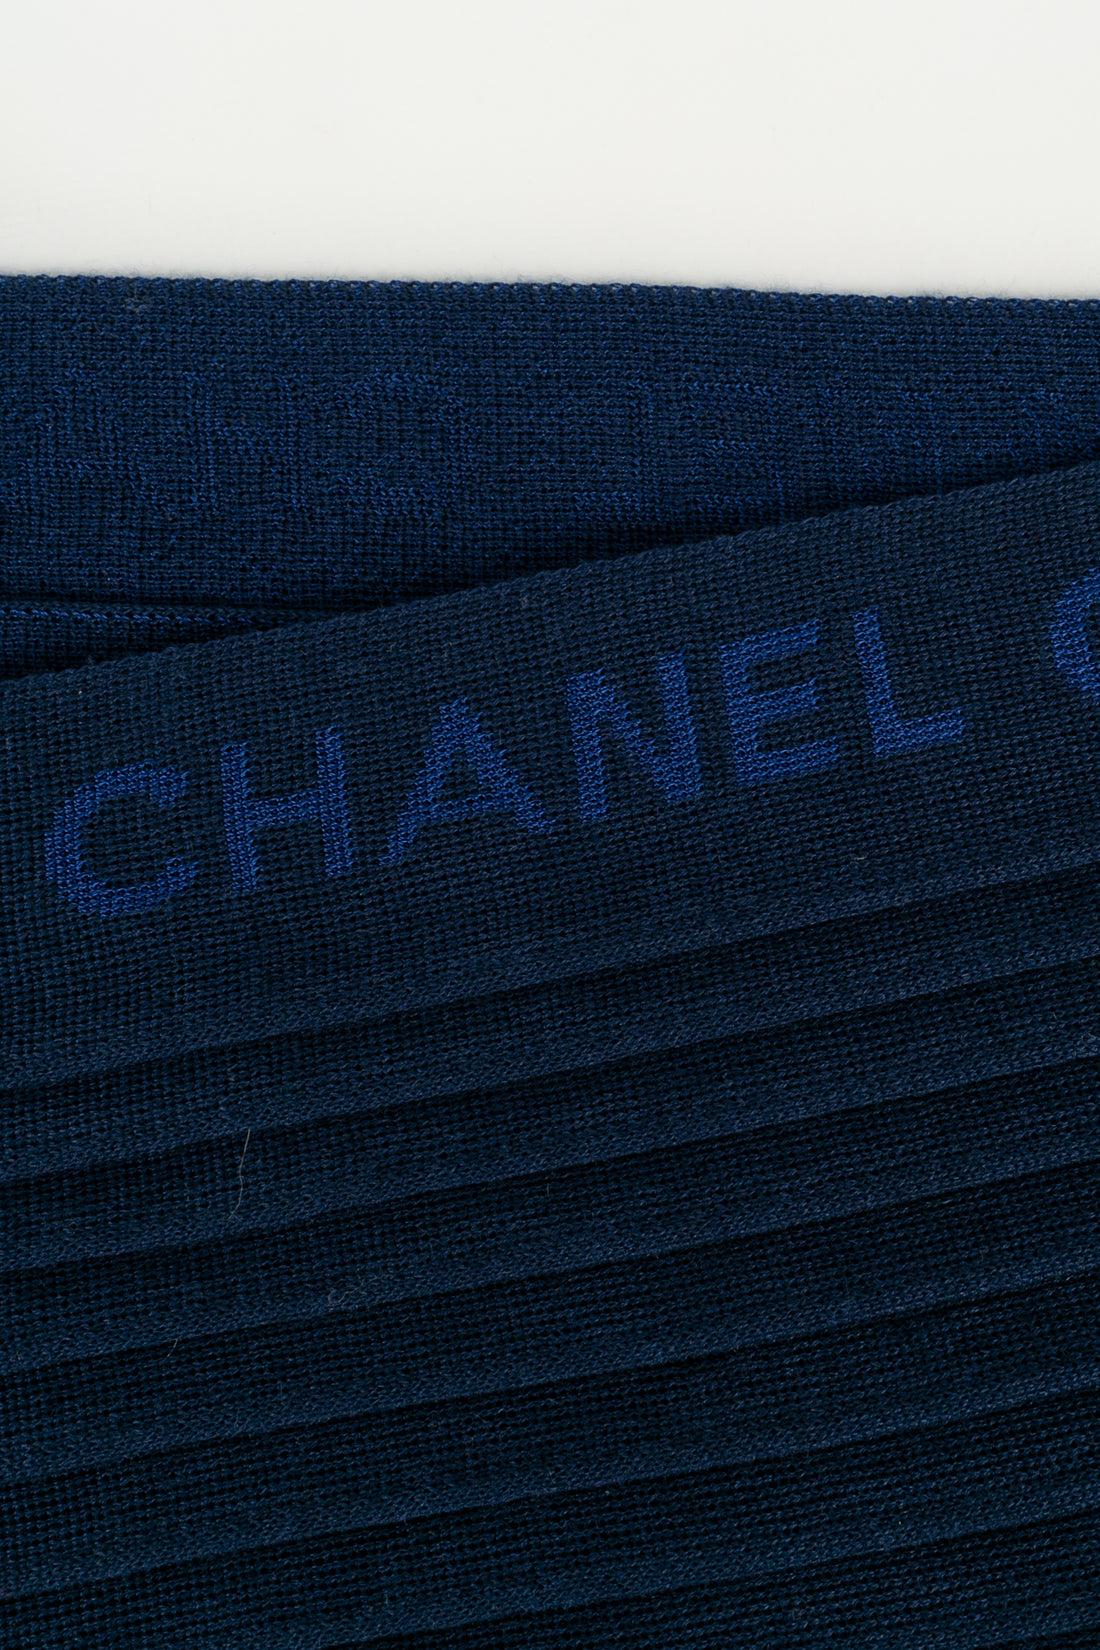 Black Chanel Navy Blue Scarf For Sale